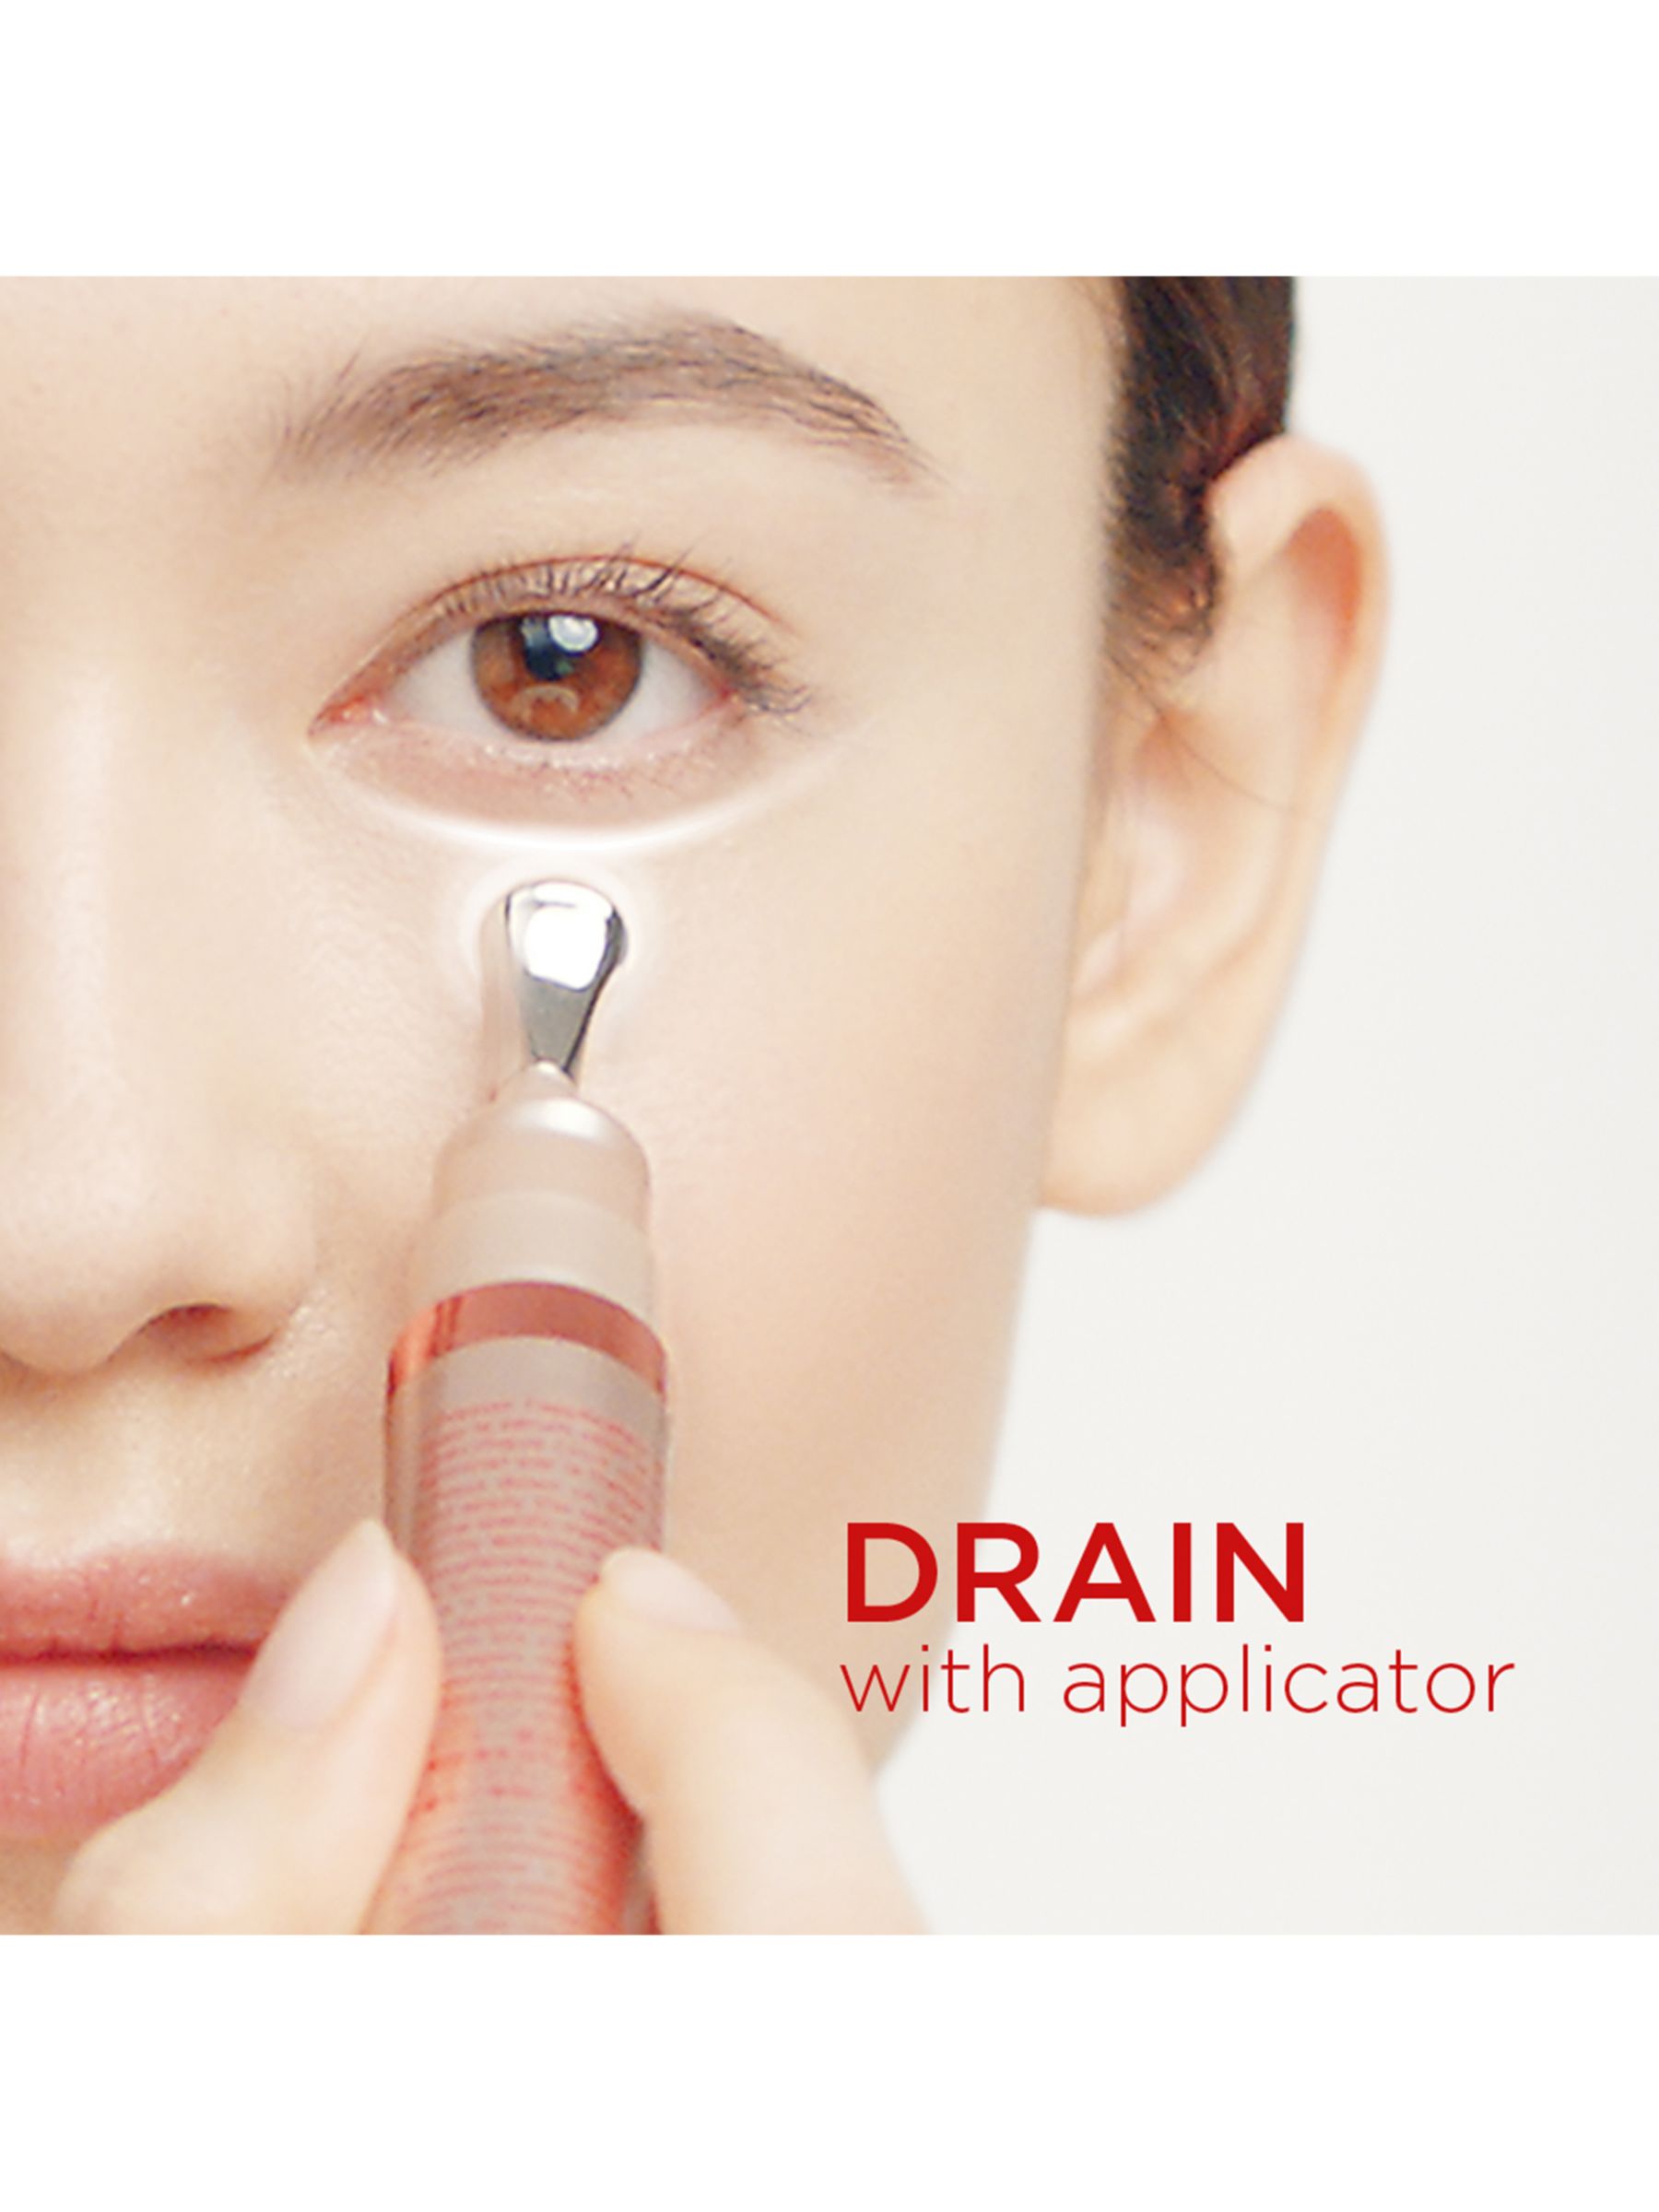 How to get bigger, brighter eyes with V Shaping Facial Lift Eye Concentrate